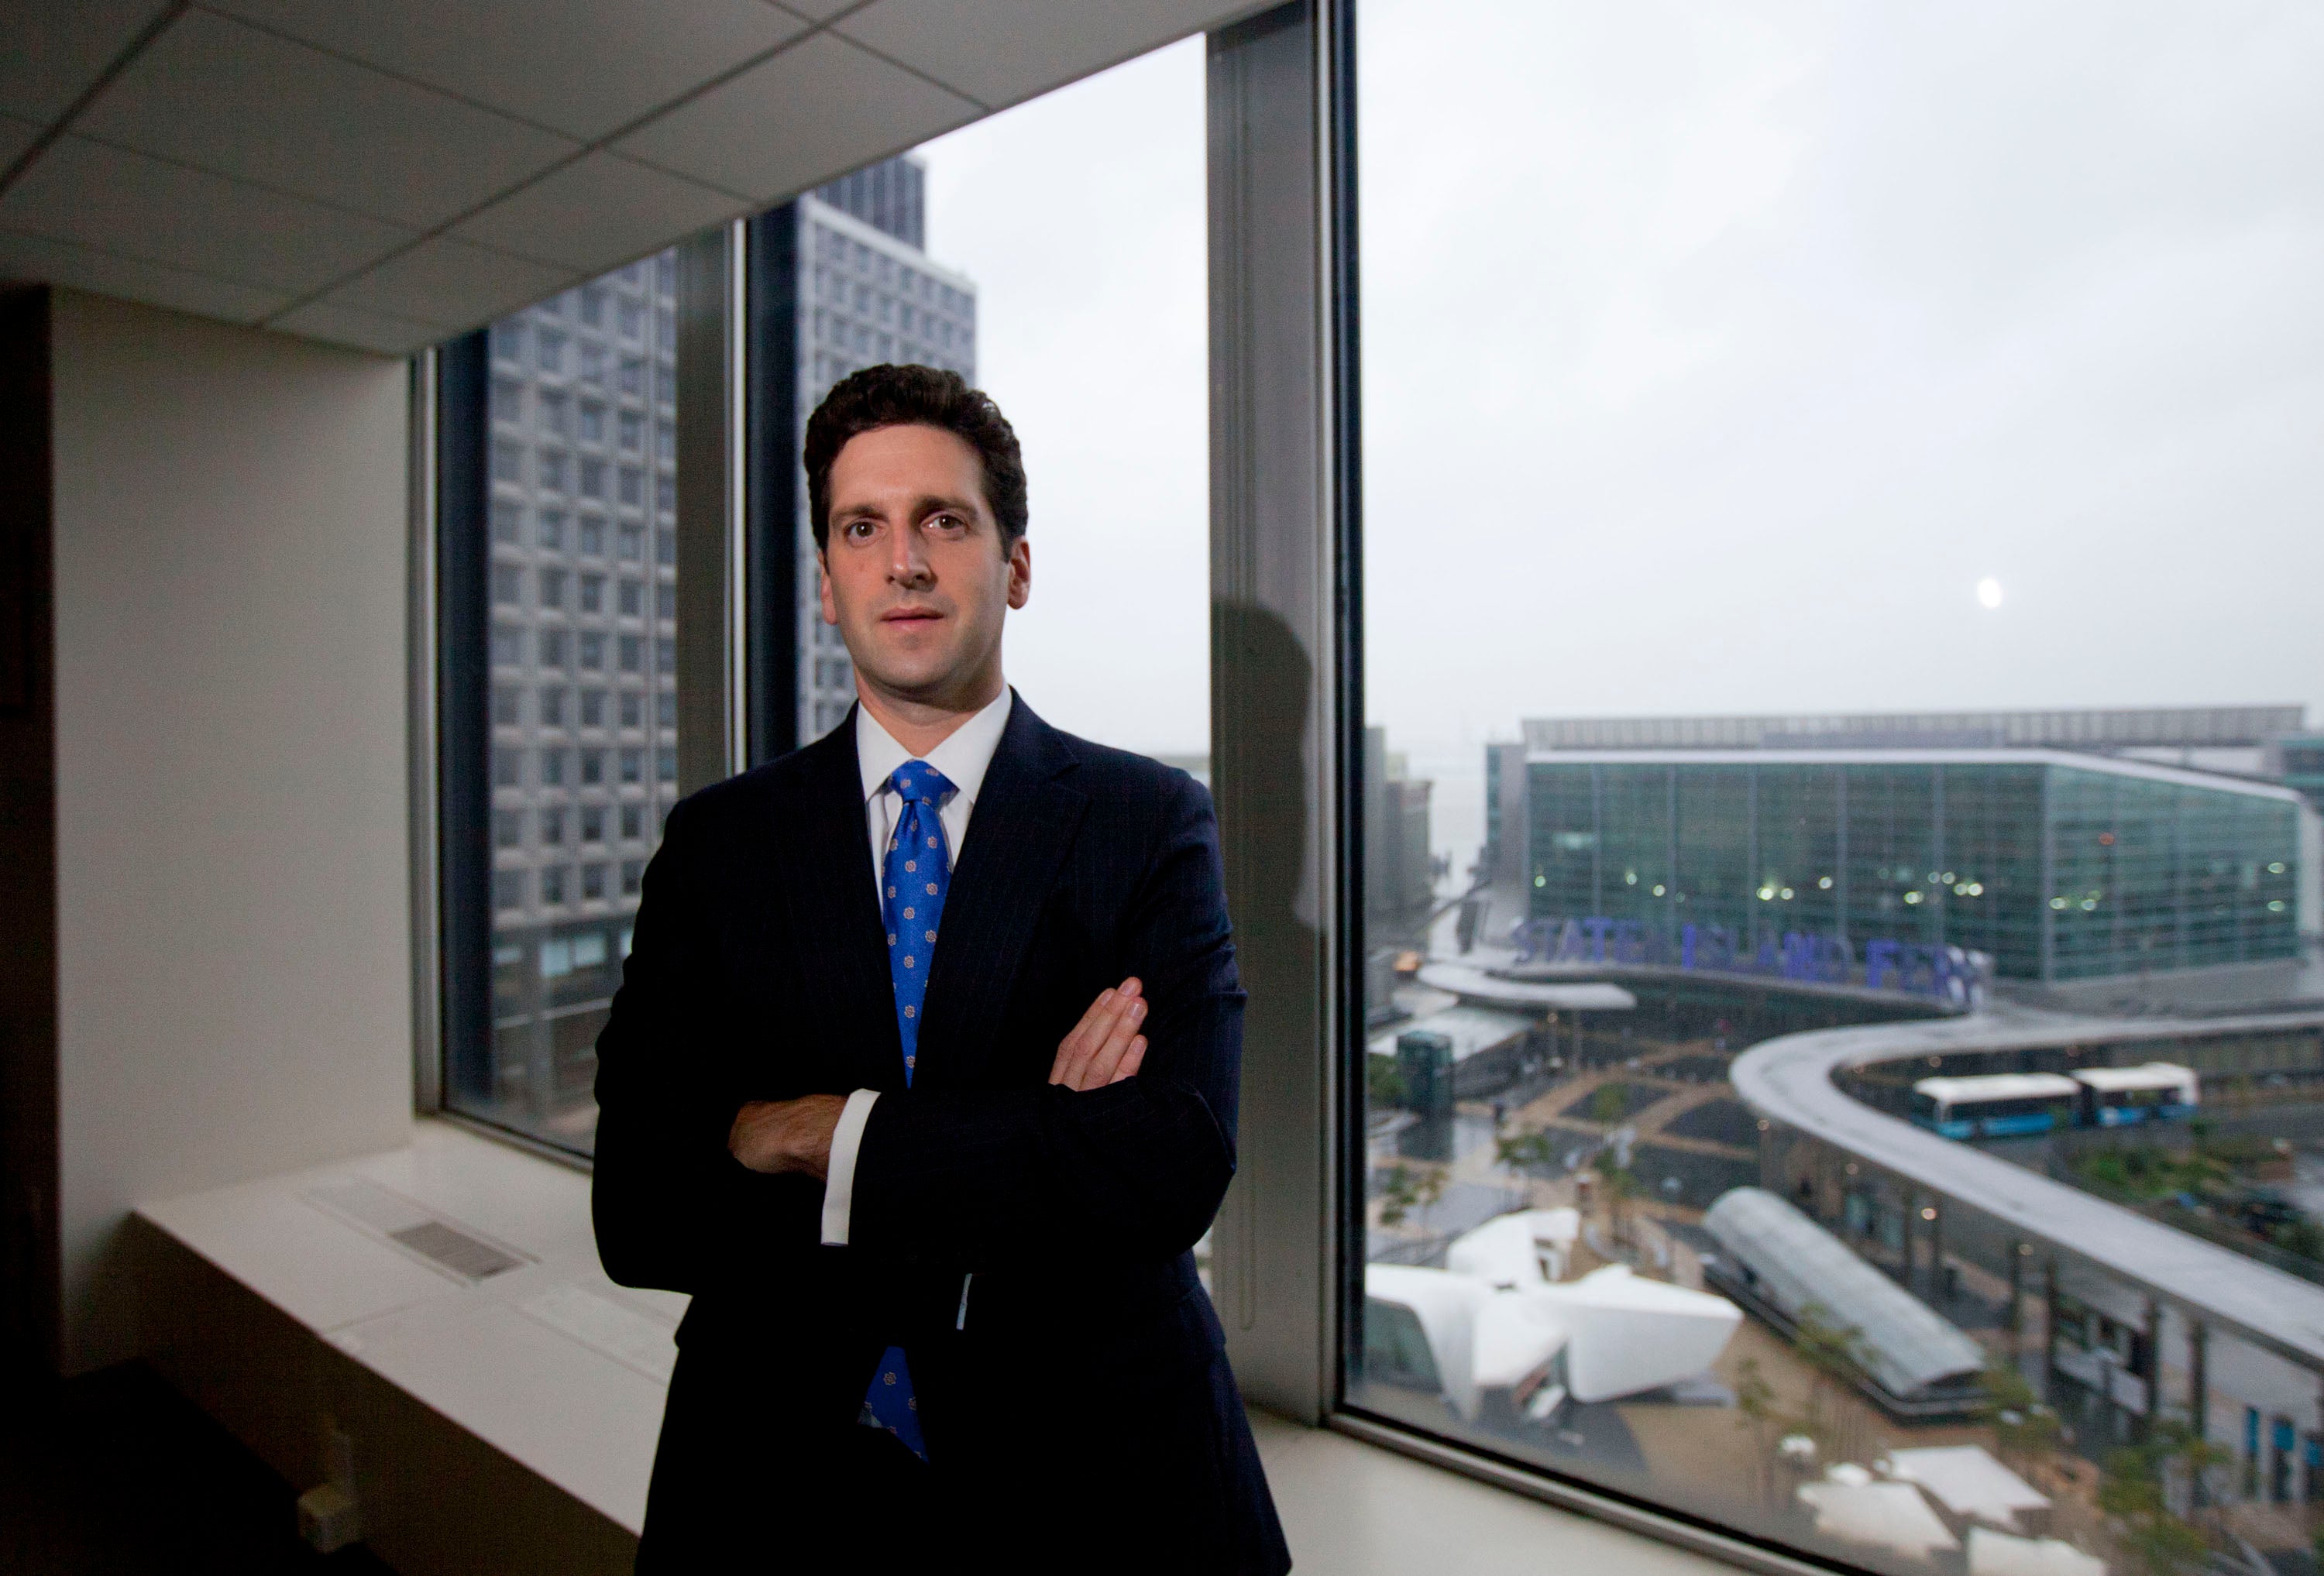 Benjamin Lawsky, New York’s superintendent of financial services